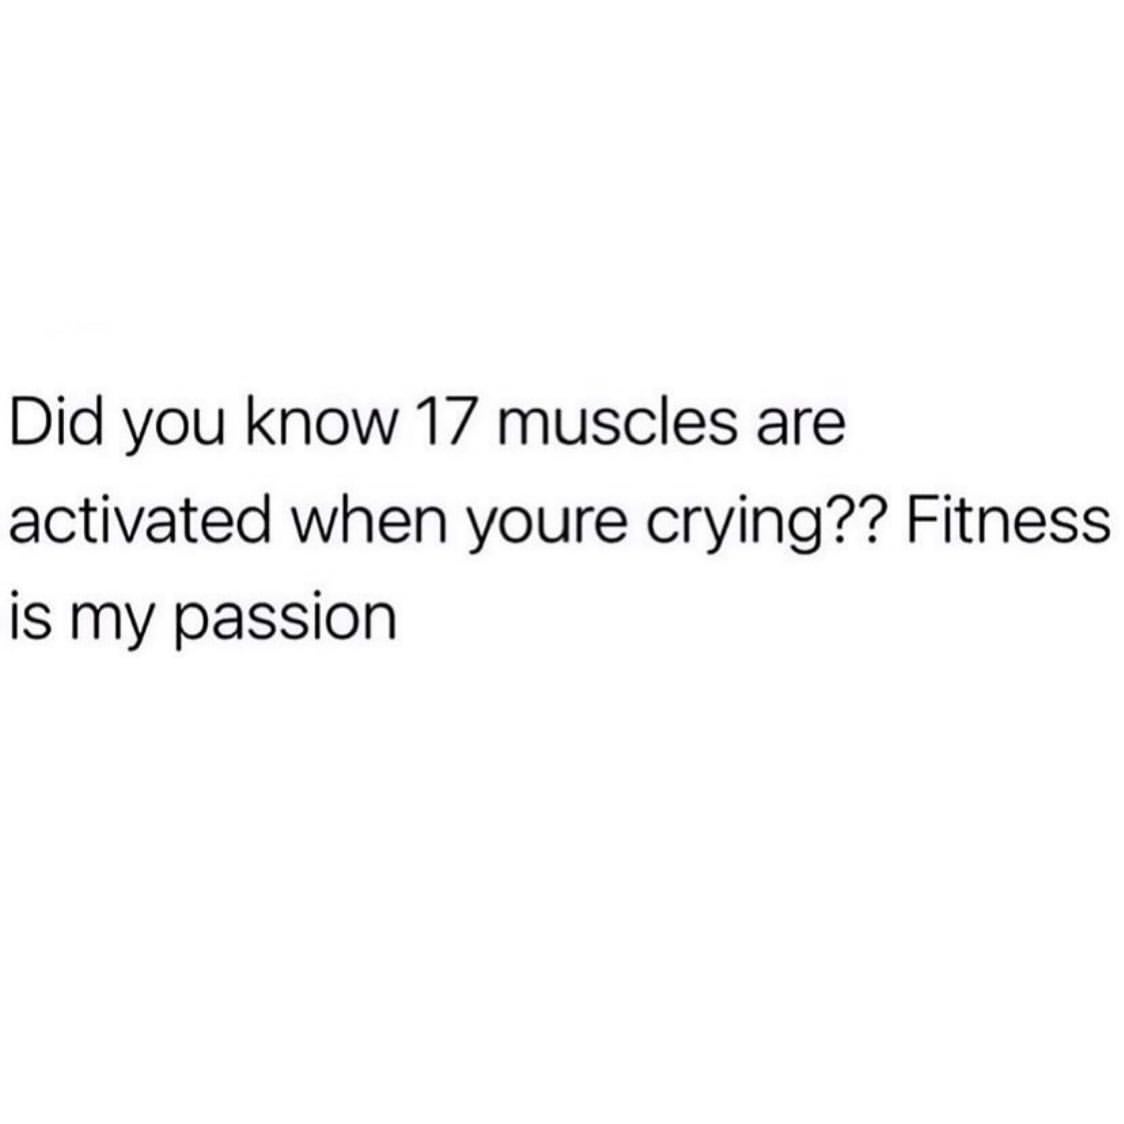 Did you know 17 muscles are activated when you're crying?? Fitness is my passion.